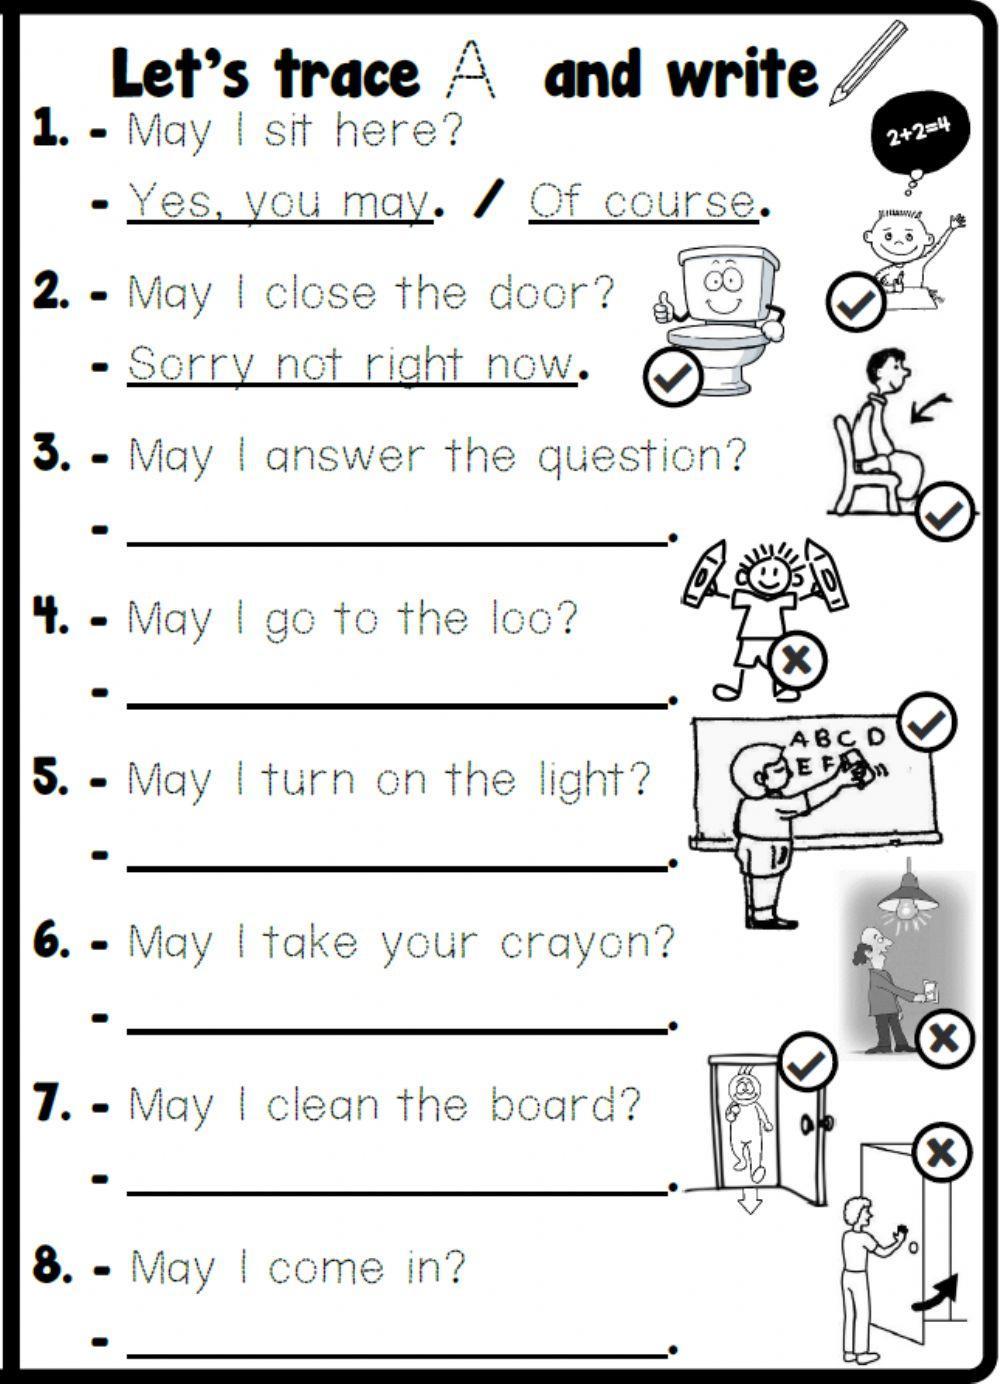 4.1. Classroom Rules - Look and Write.